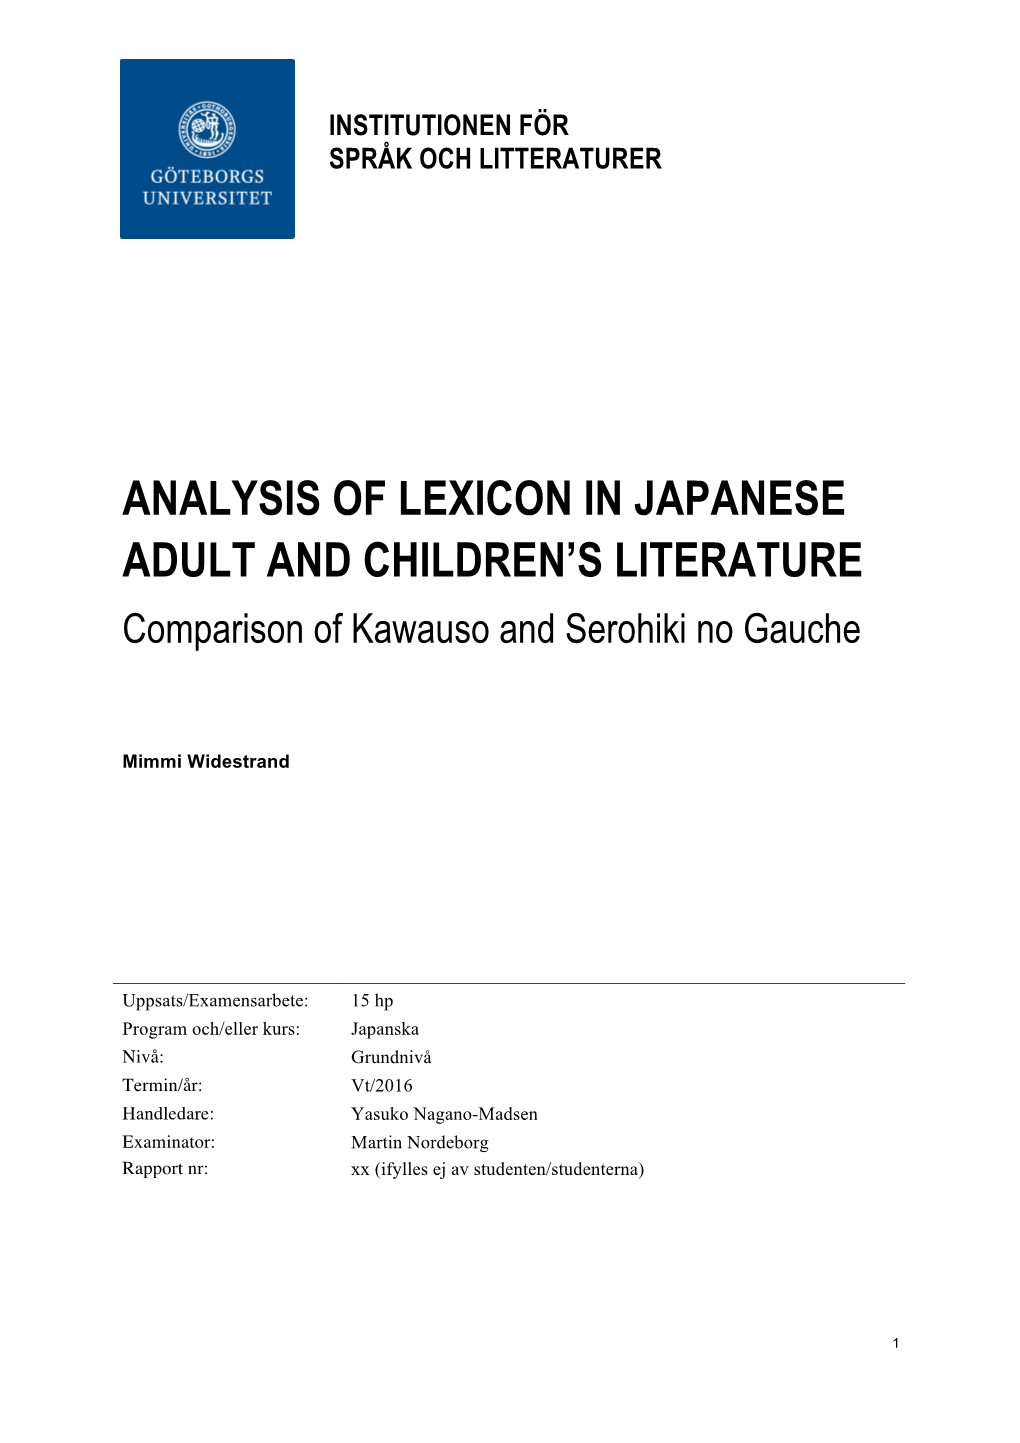 ANALYSIS of LEXICON in JAPANESE ADULT and CHILDREN’S LITERATURE Comparison of Kawauso and Serohiki No Gauche